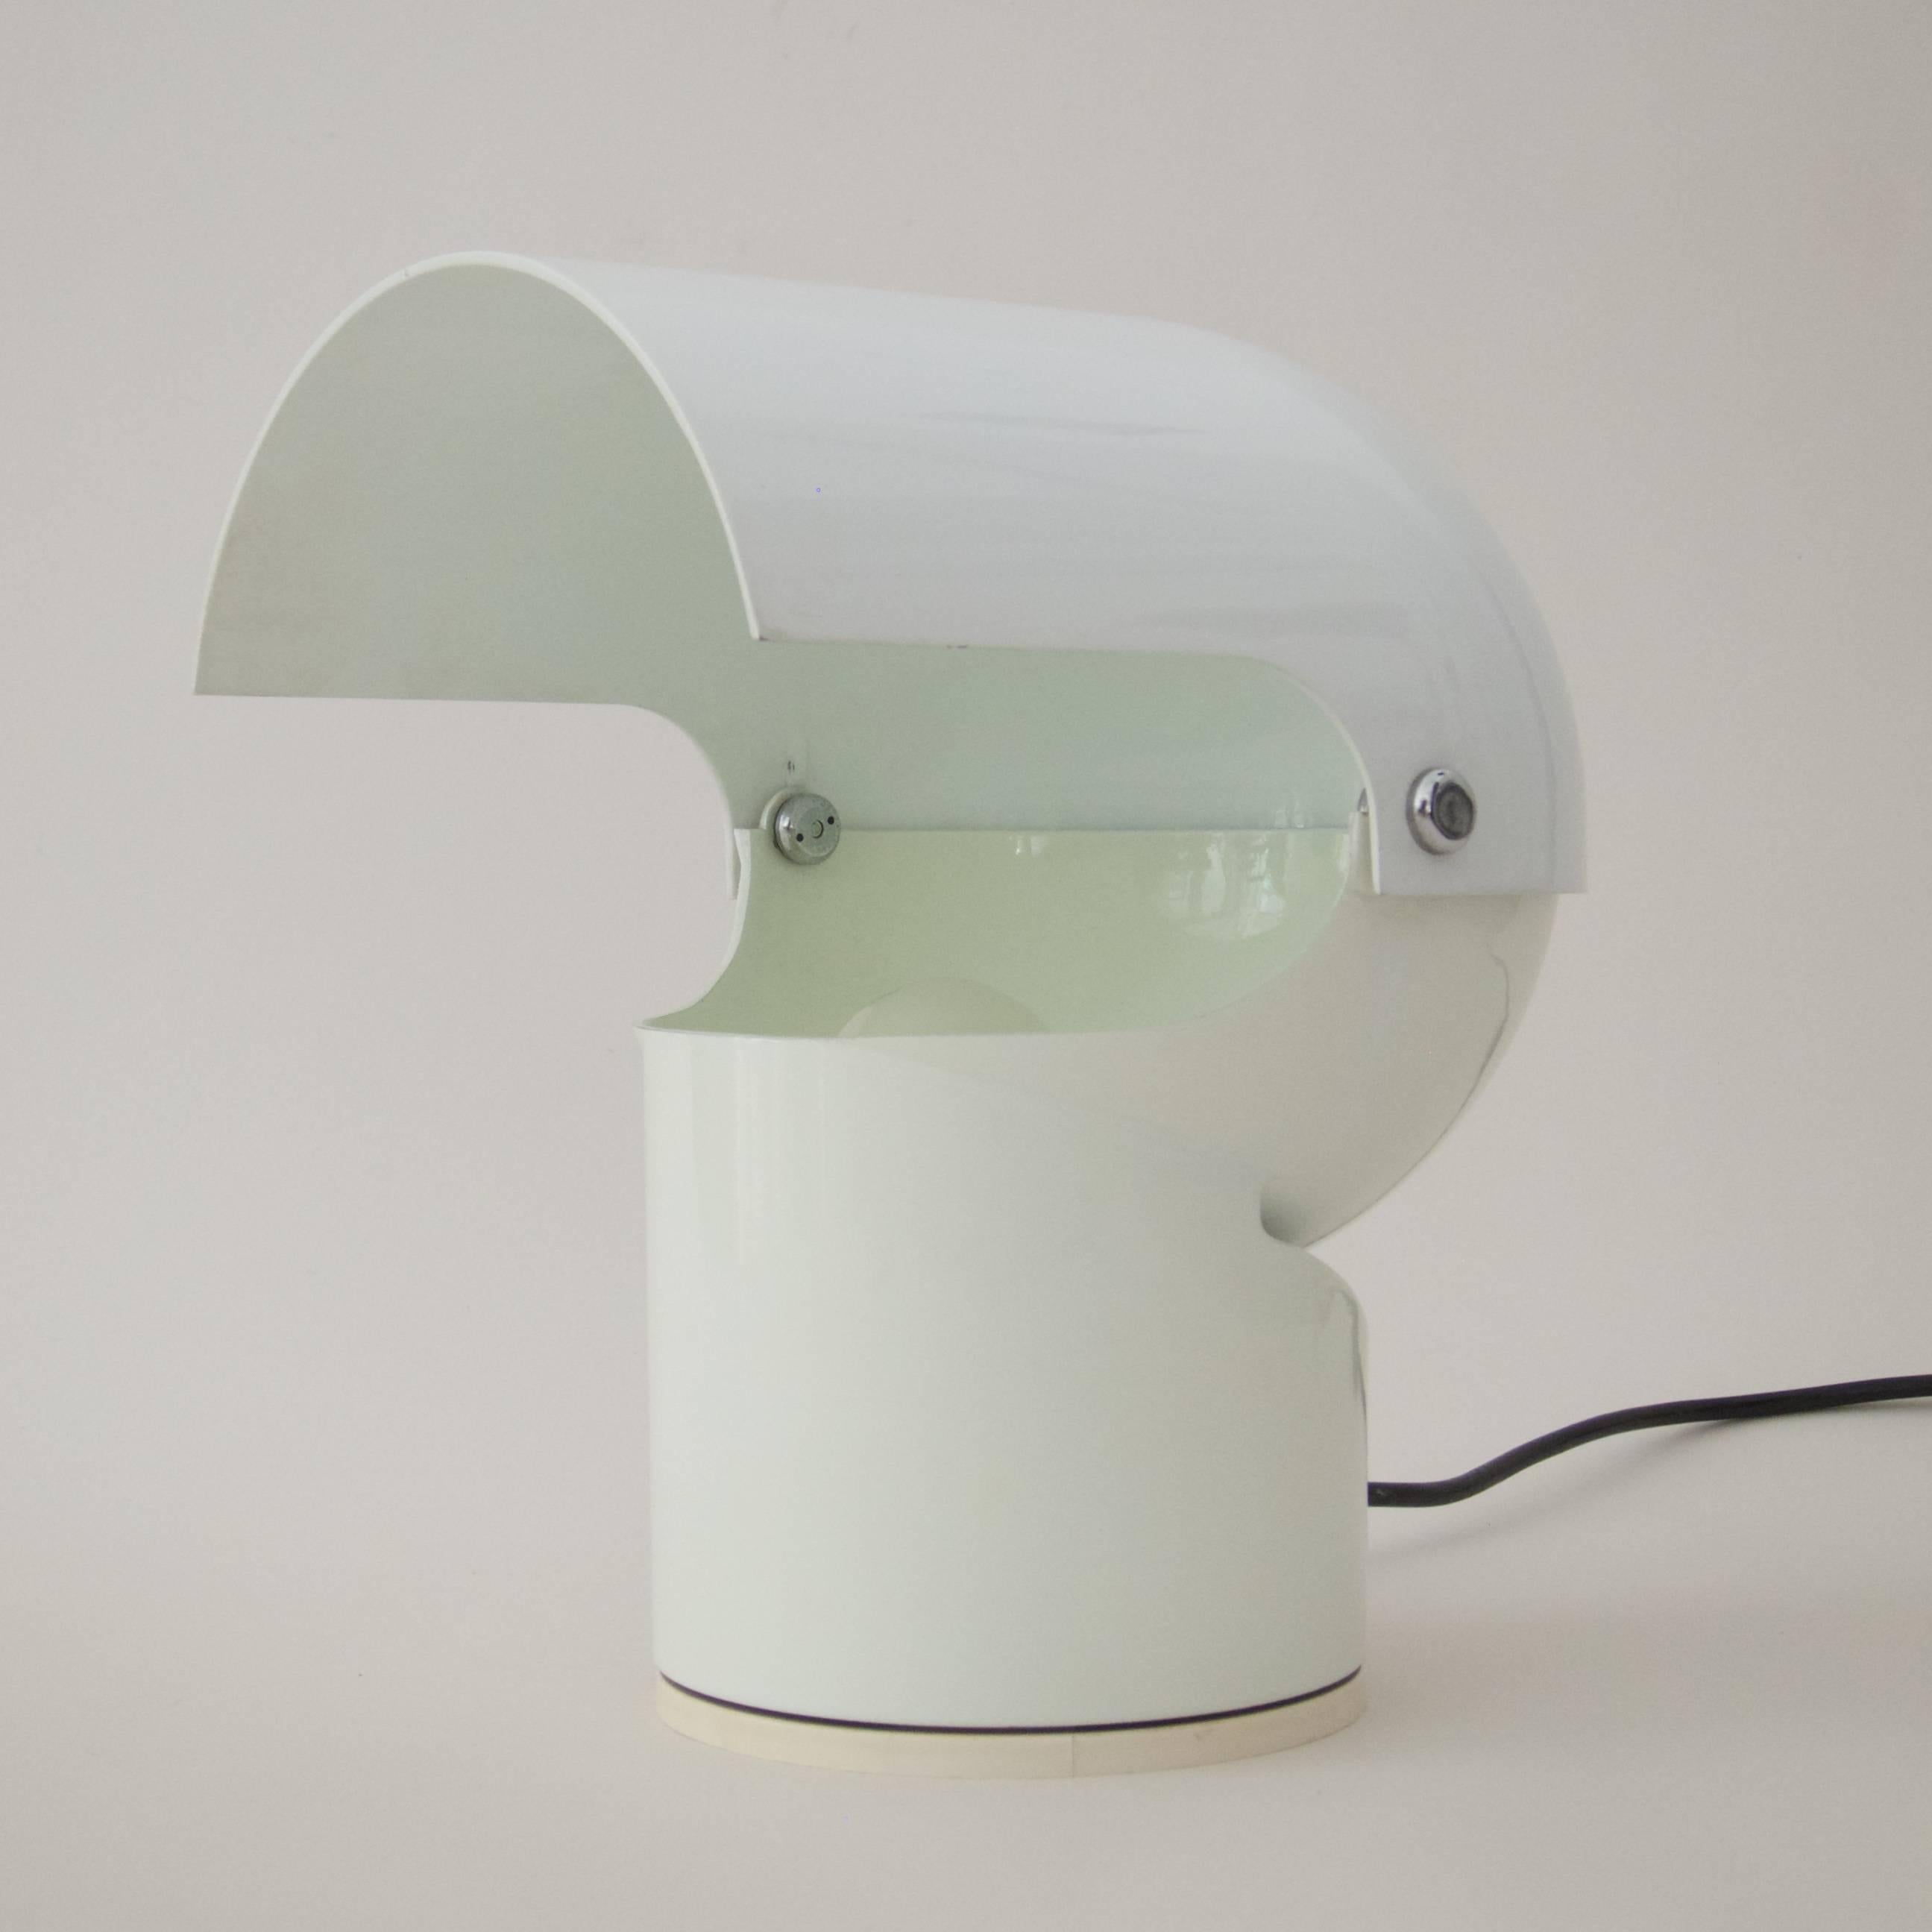 Vintage Table lamp ”Pileino” by Gae Aulenti, 1972 for Artemide.

White lacquered aluminum body and shade with a white plastic base.
The shade can be rotated to create several light situations.

white laquered aluminum, plastic base

Measures: H 24.5